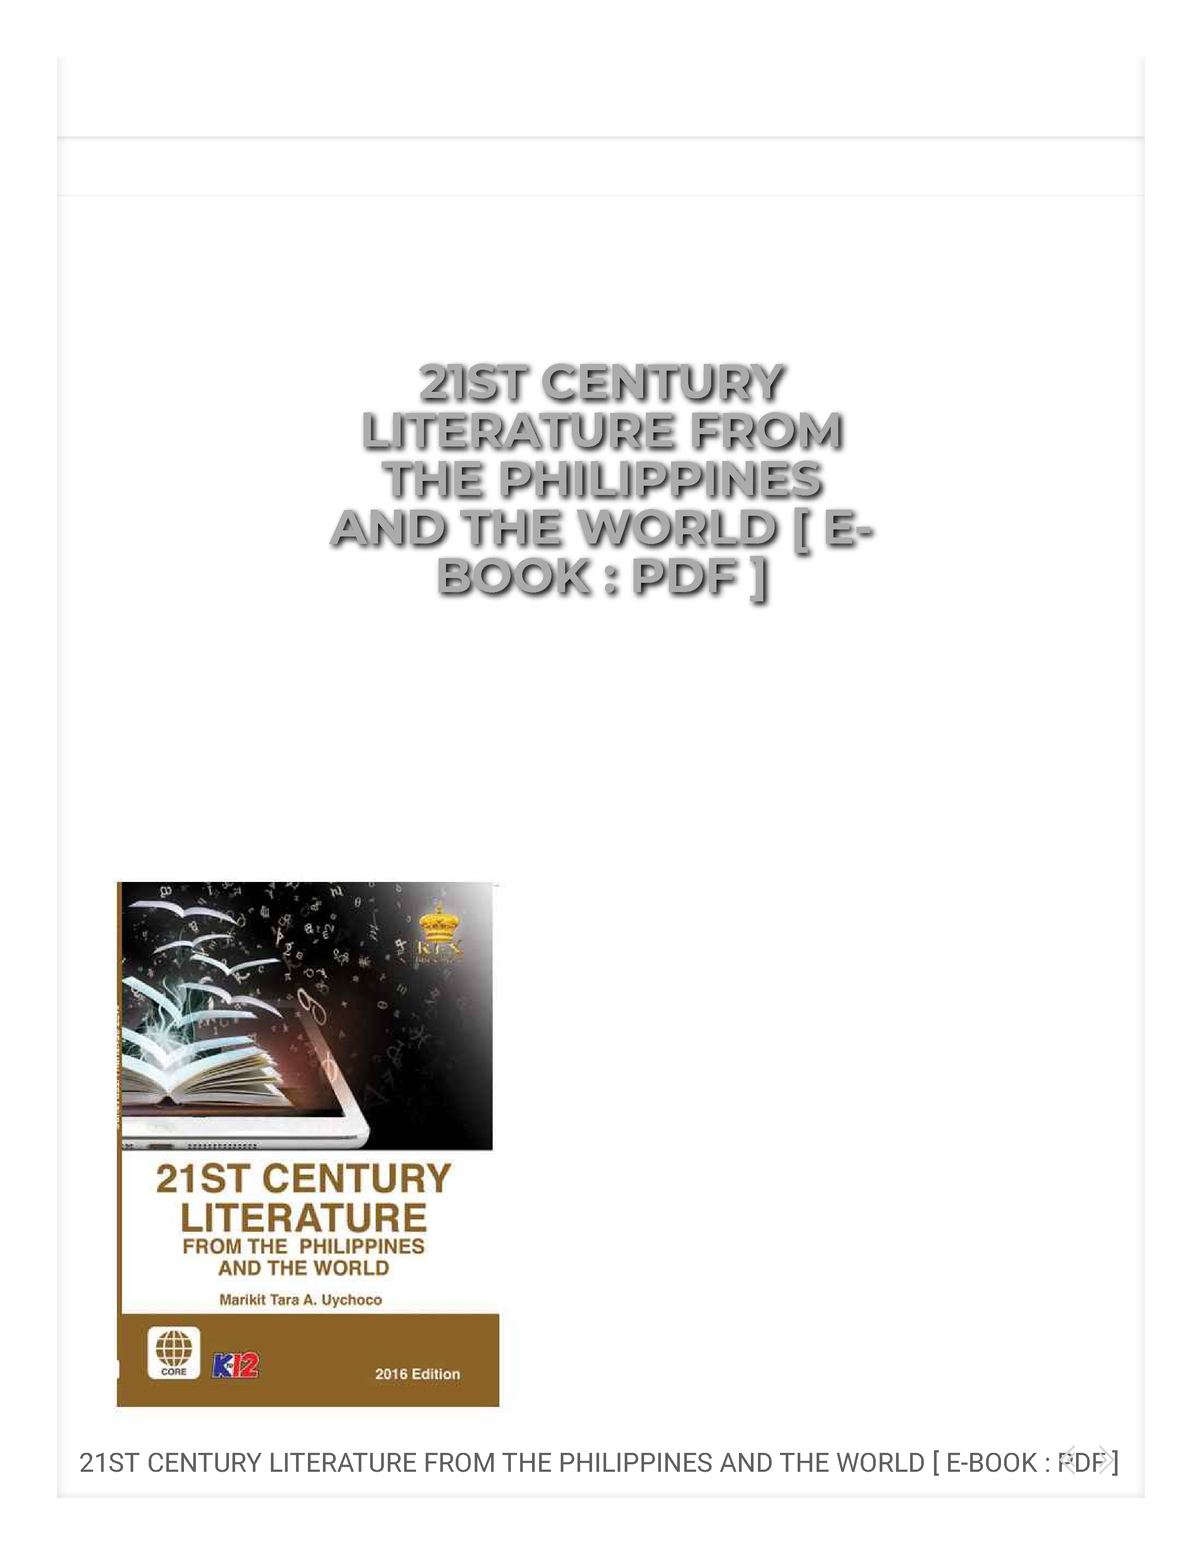 pdfcoffee .com_21st-century-literature-from-the-philippines-to-the-world-pdf-.pdf